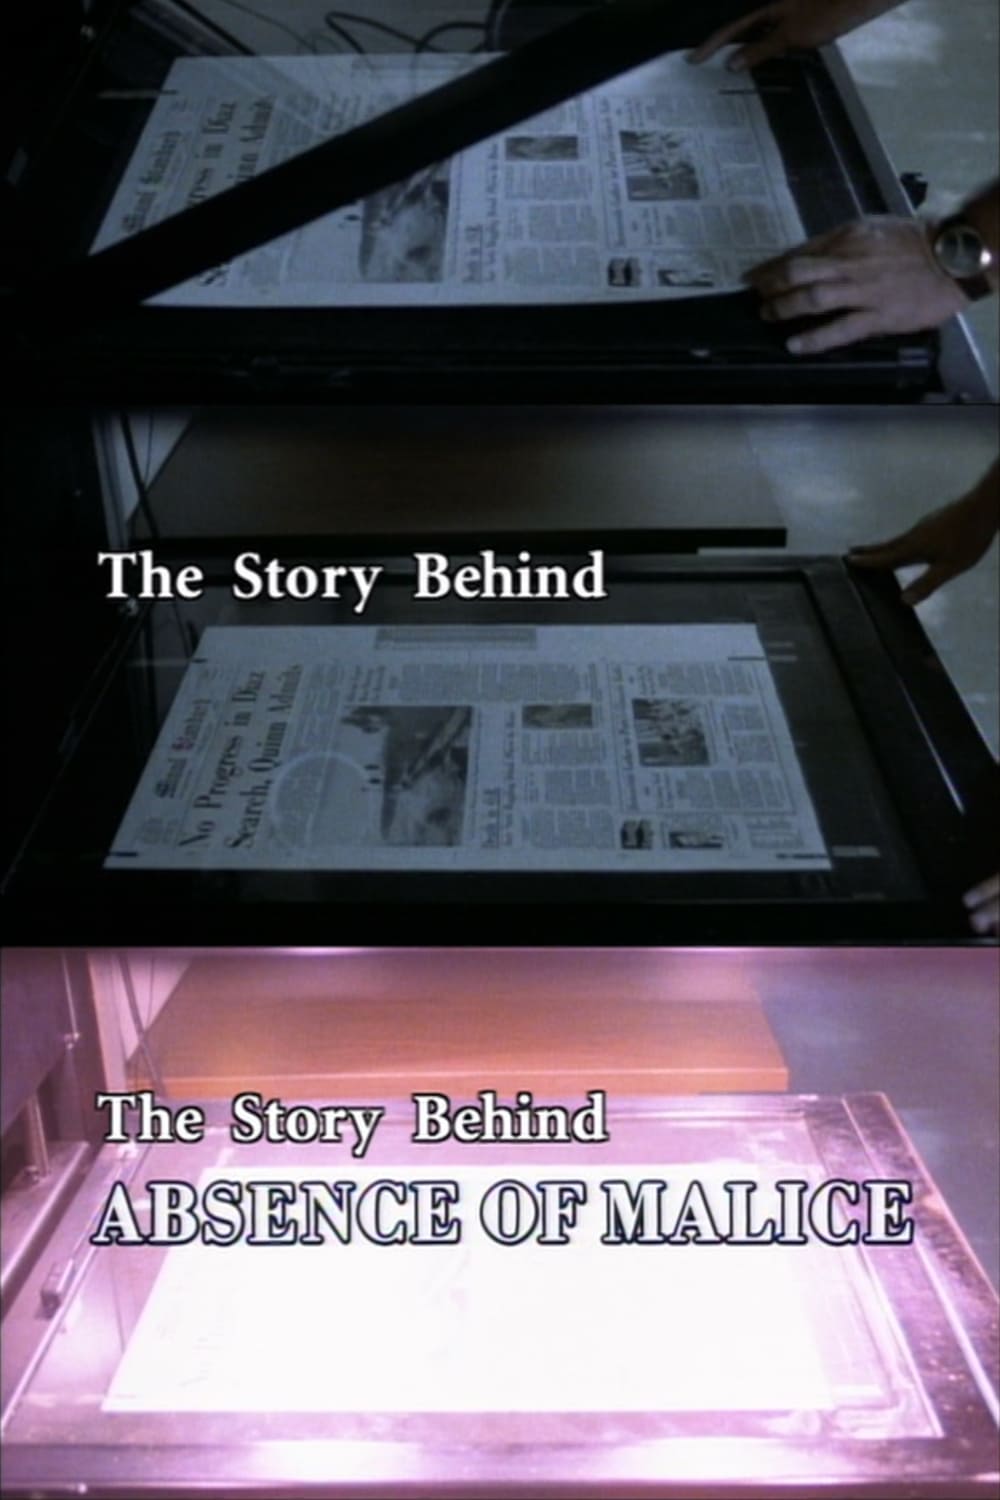 The Story Behind "Absence of Malice"